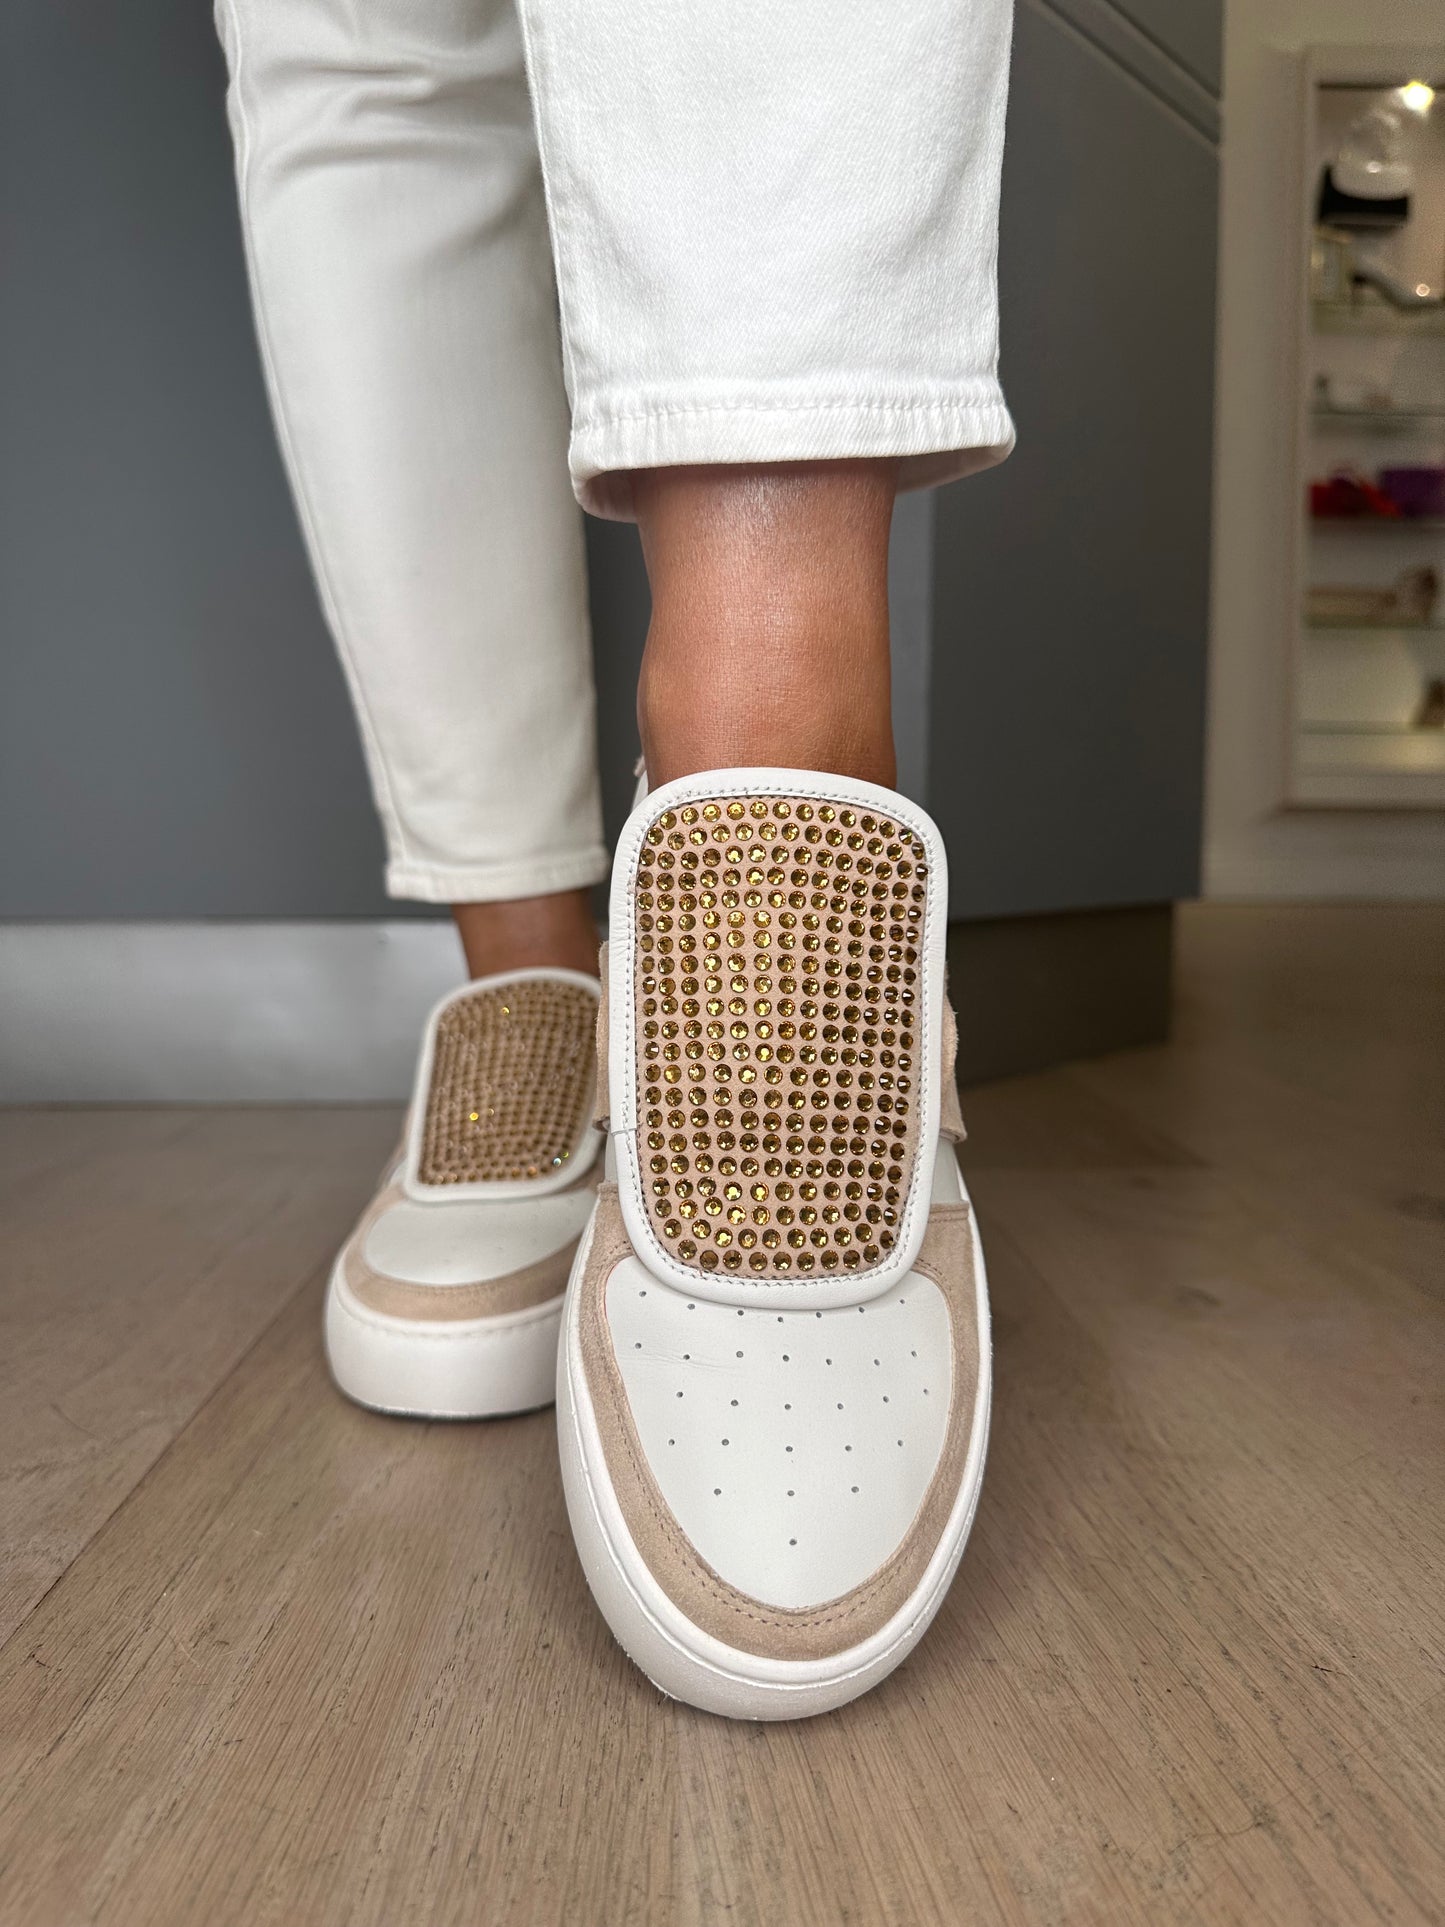 Oxitaly ( Fratelli Russo) 'Claire' White Leather/Sand Suede Flatform Studded Trainer